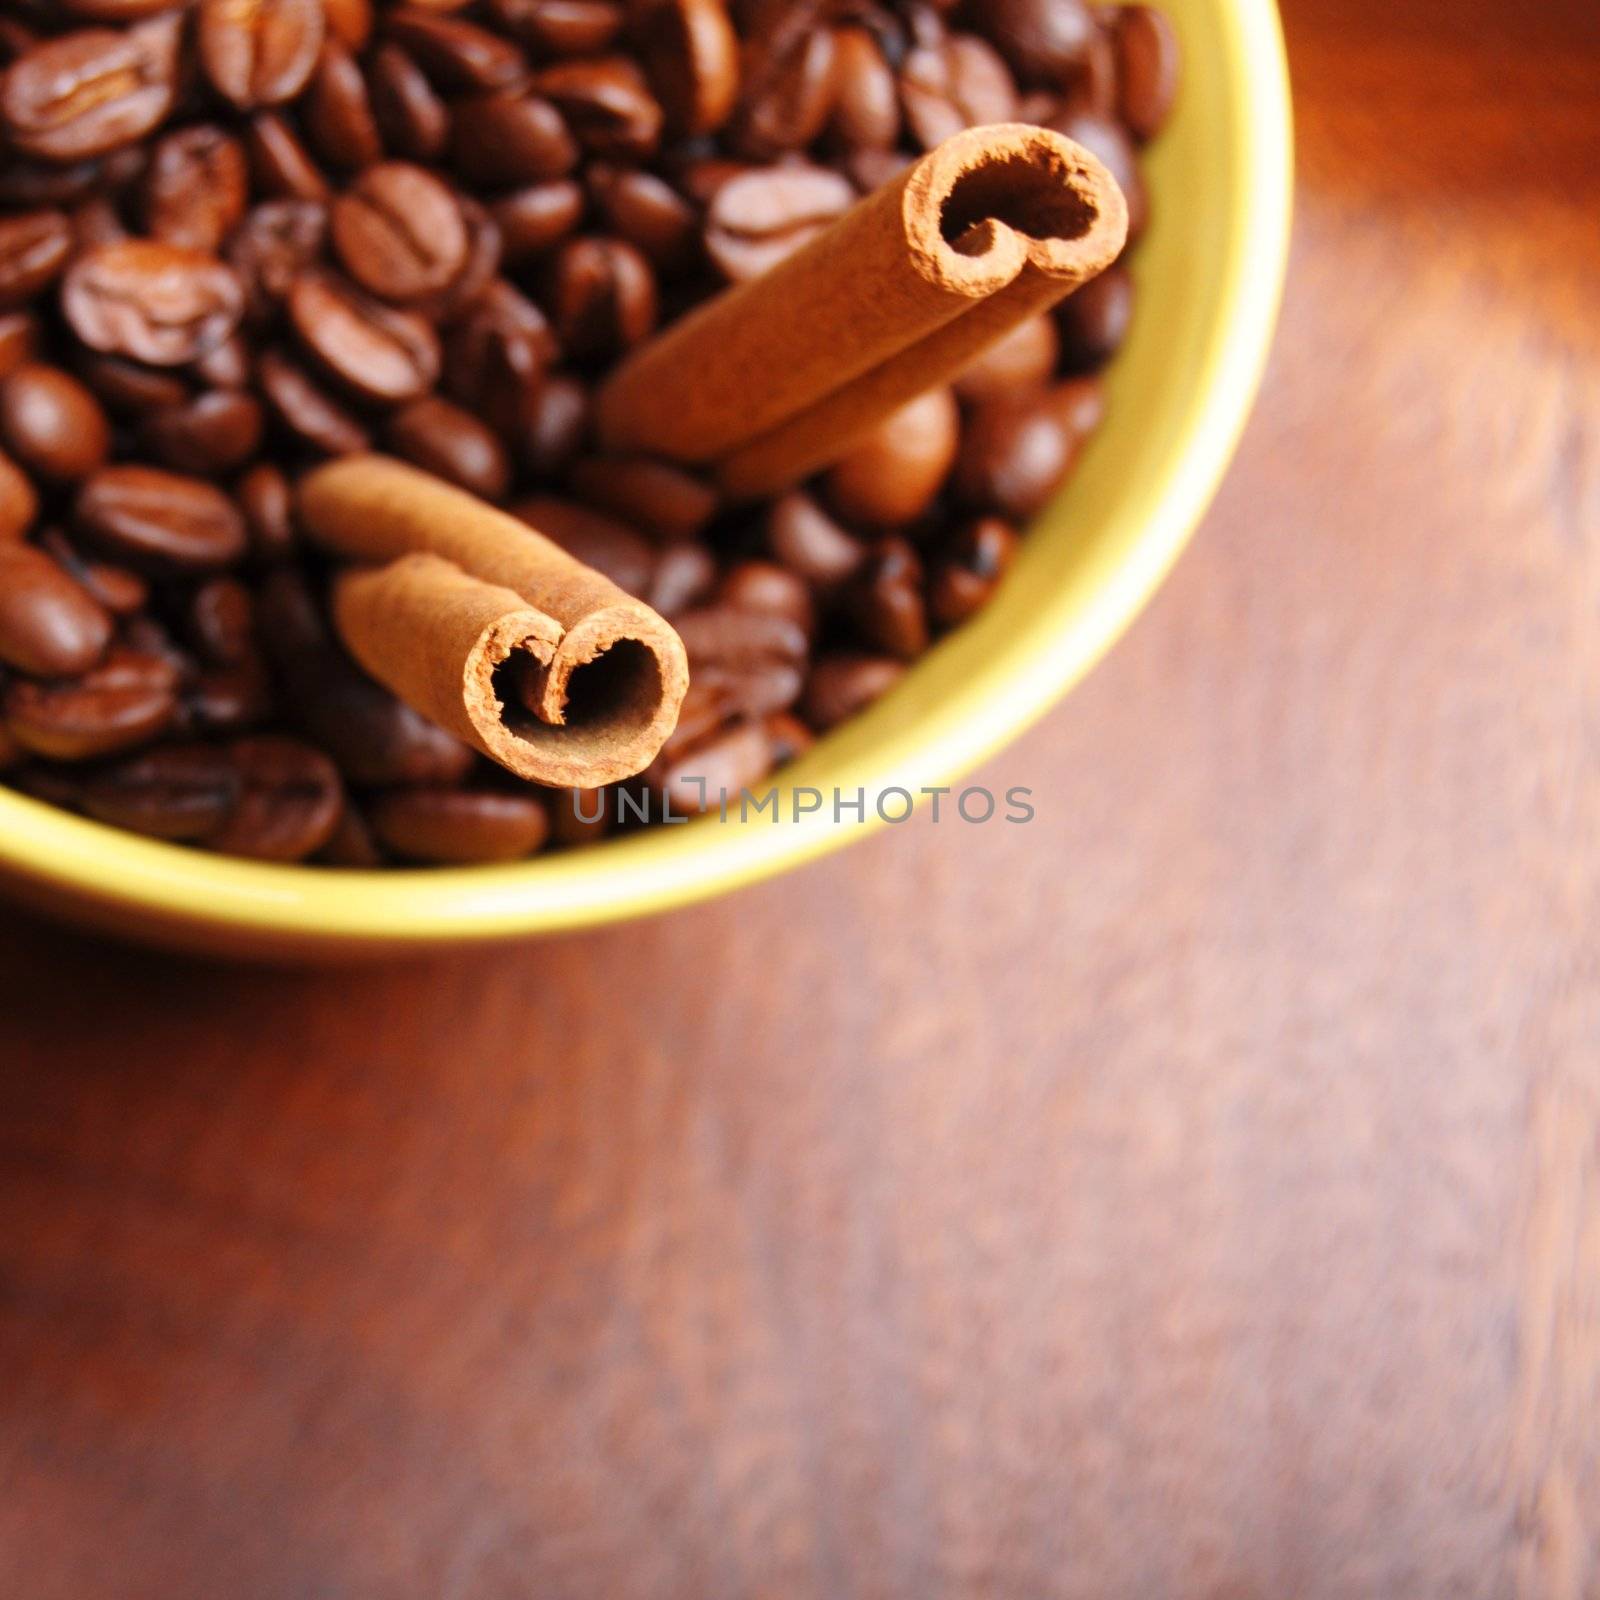 coffee beans and cinnamon with copyspace showing food concept